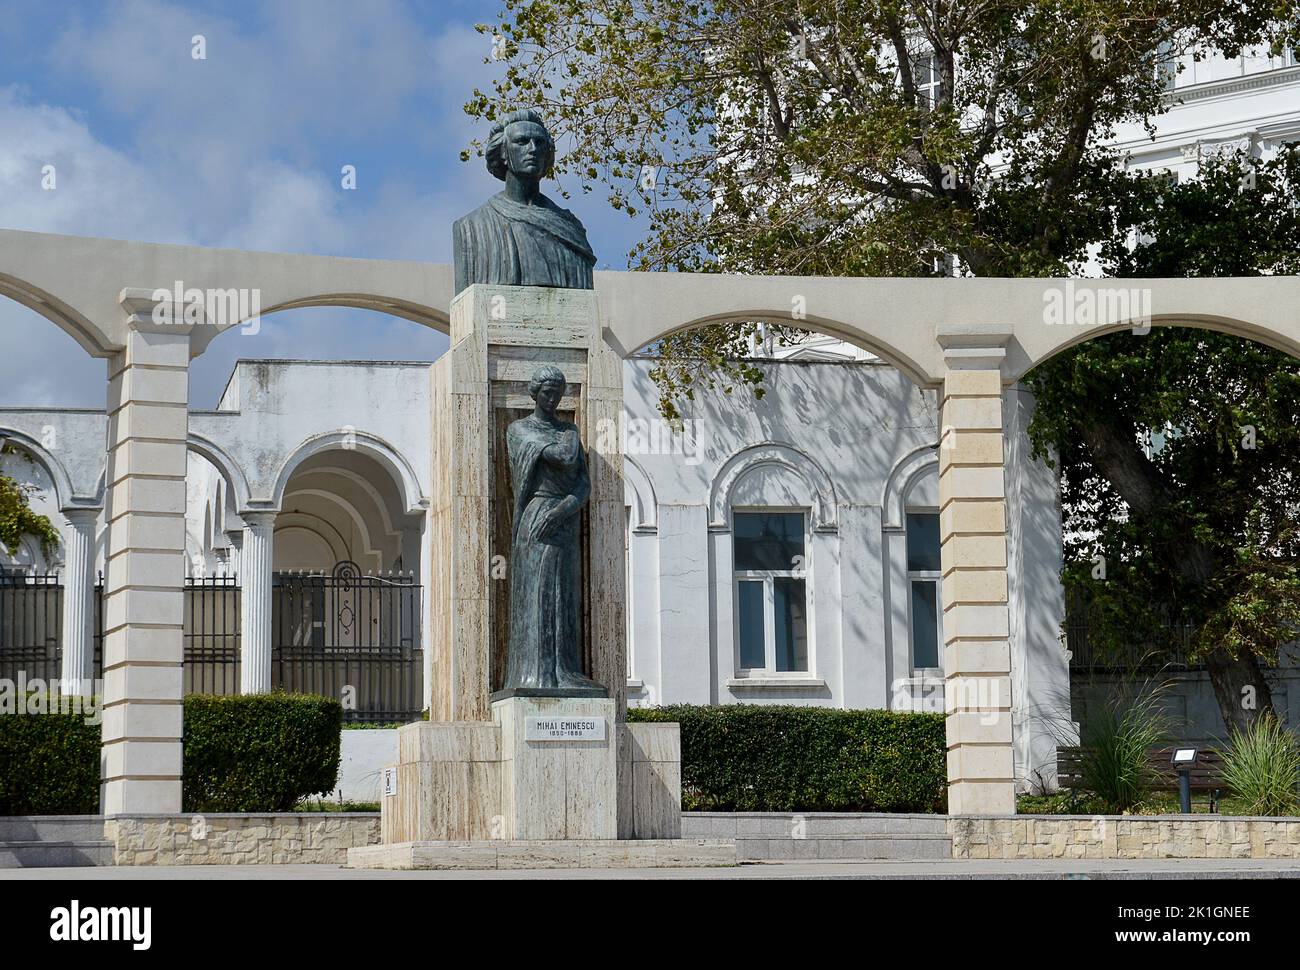 CONSTANTA, ROMANIA - SEPTEMBER 2022: Memorial to Mihai Eminescu on the seafront with a bronze bust created by Oscar Han in 1930. Stock Photo